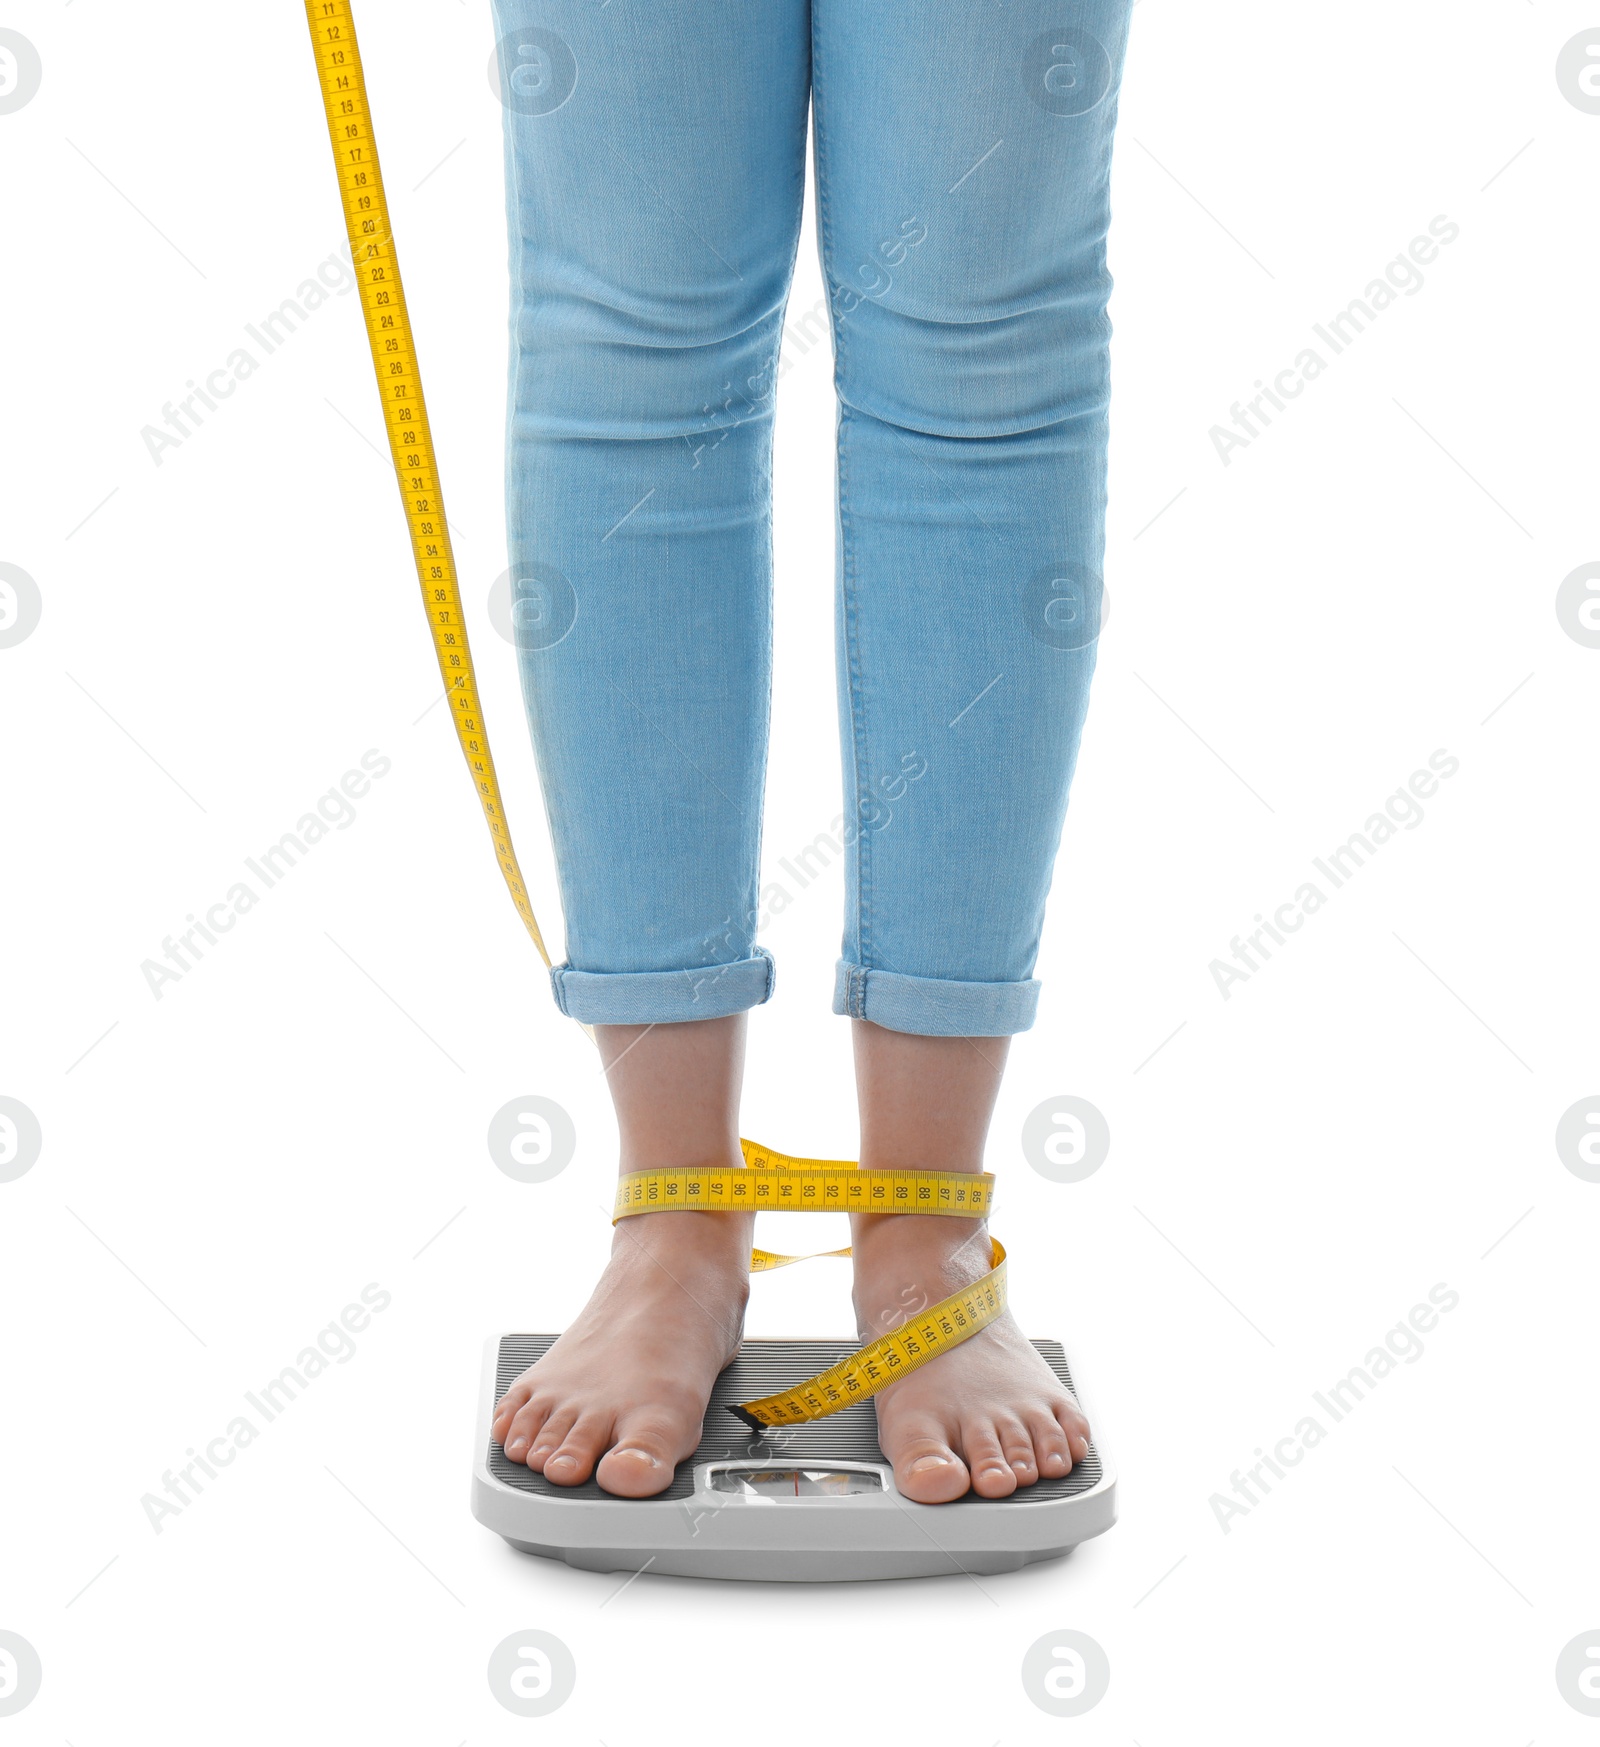 Photo of Woman with tape measuring her weight using scales on white background. Healthy diet